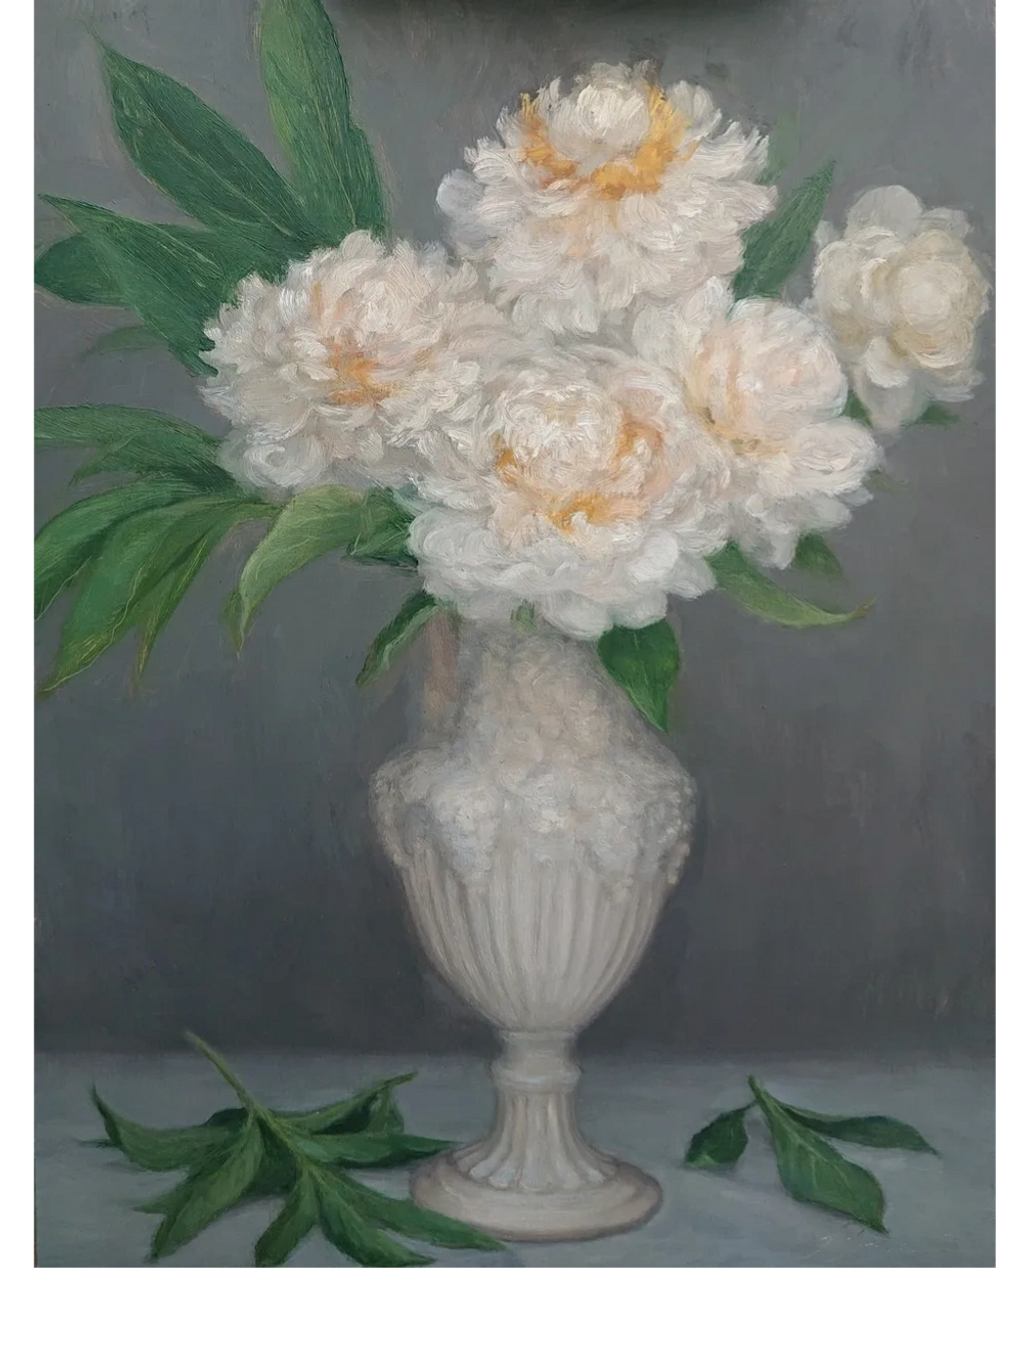 White Peonies in a white vase against a grey background.